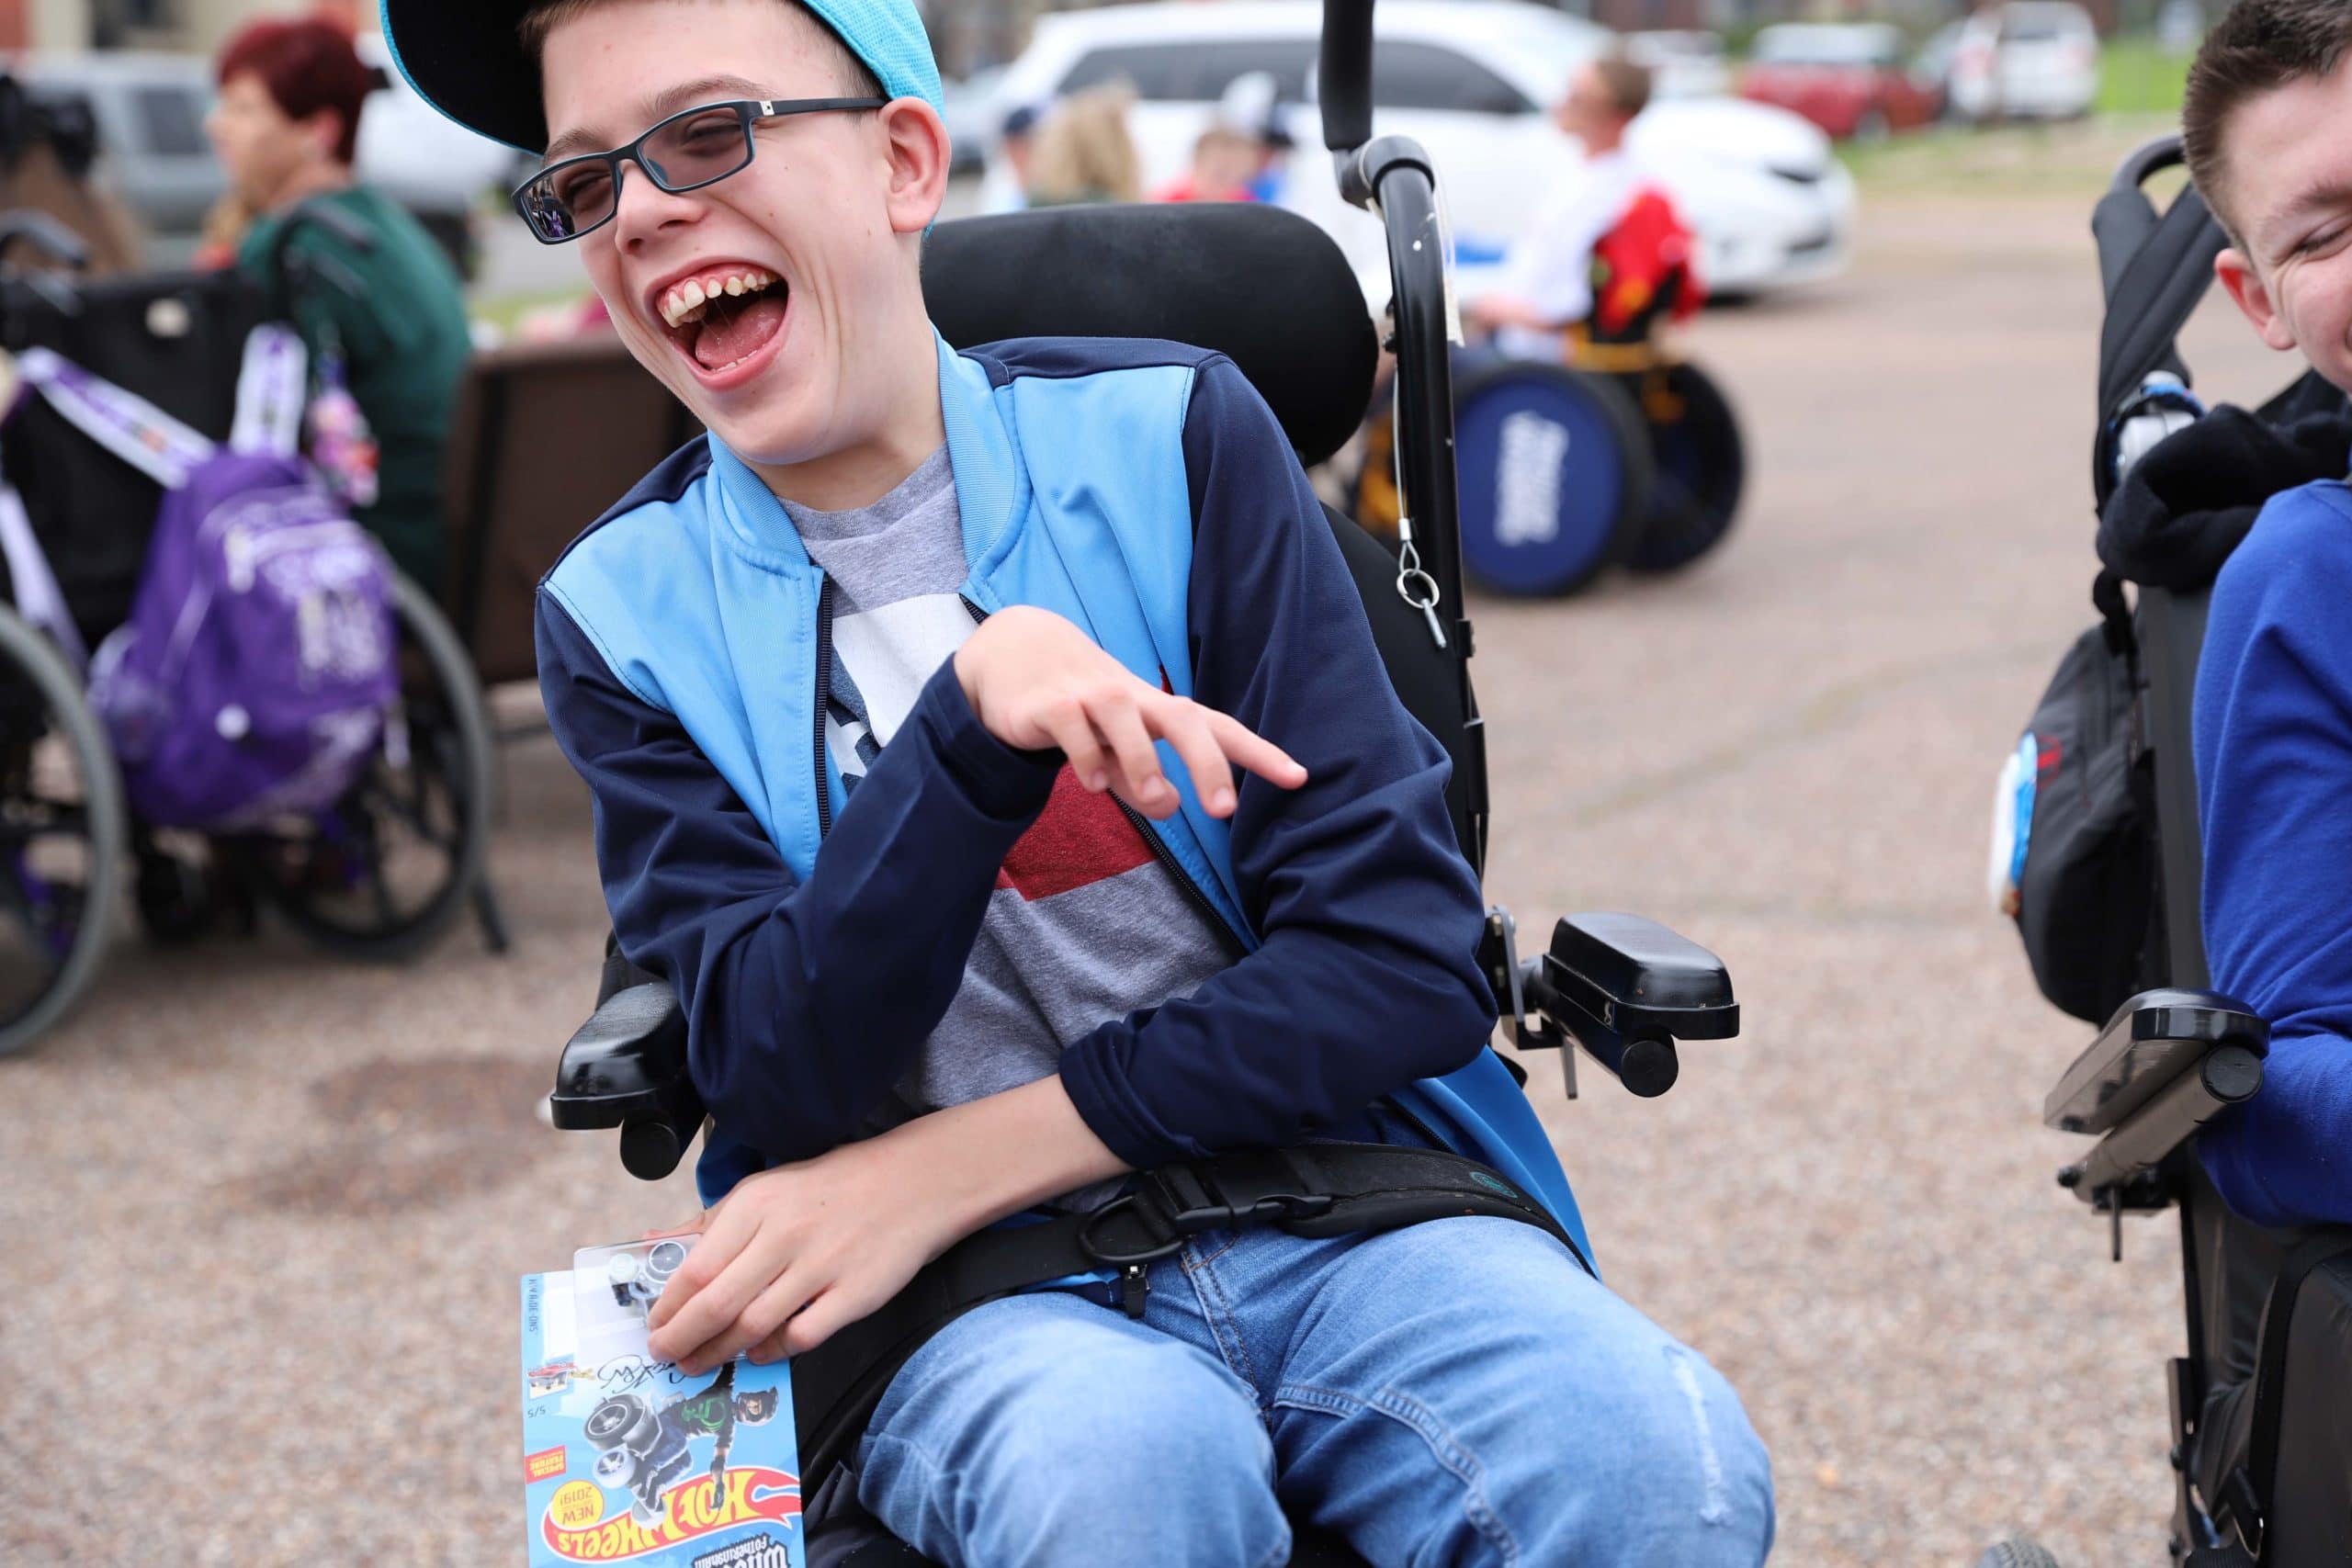 A boy in a power wheelchair wearing a baseball cap and sunglasses smiles large while looking off to his side.